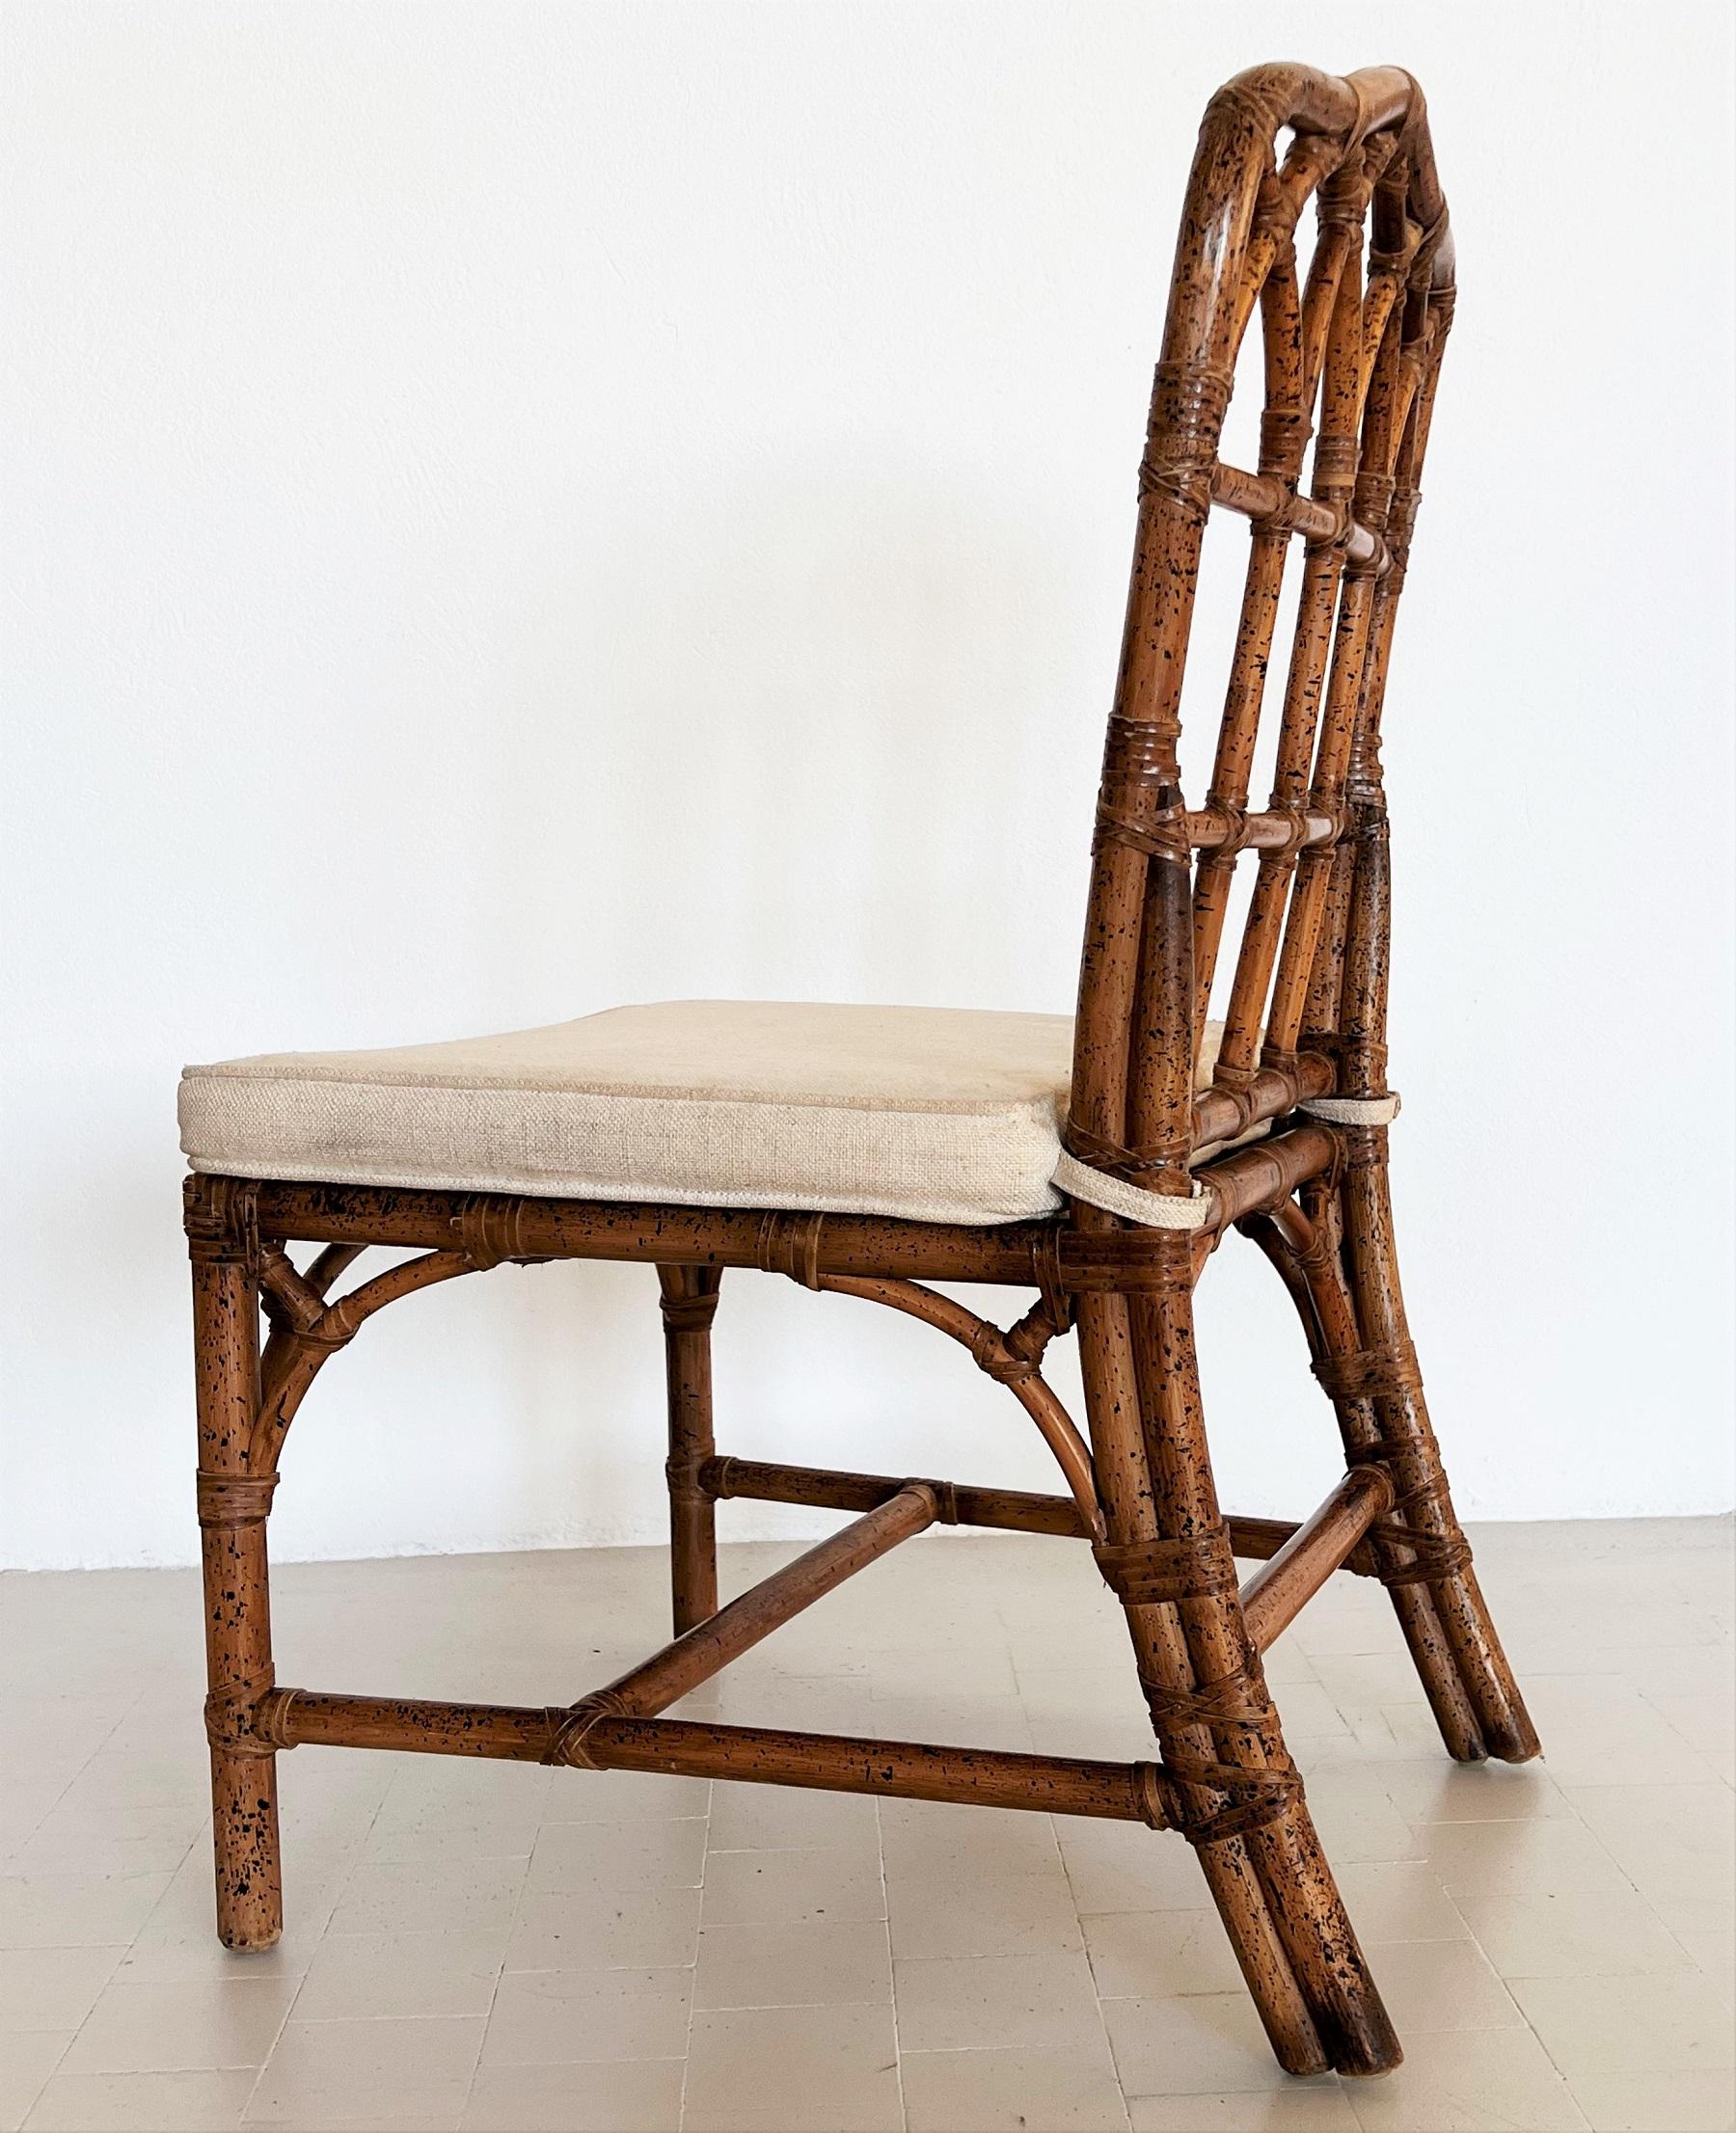 Italian Large Mid-Century Bamboo Chair, 1970s For Sale 1